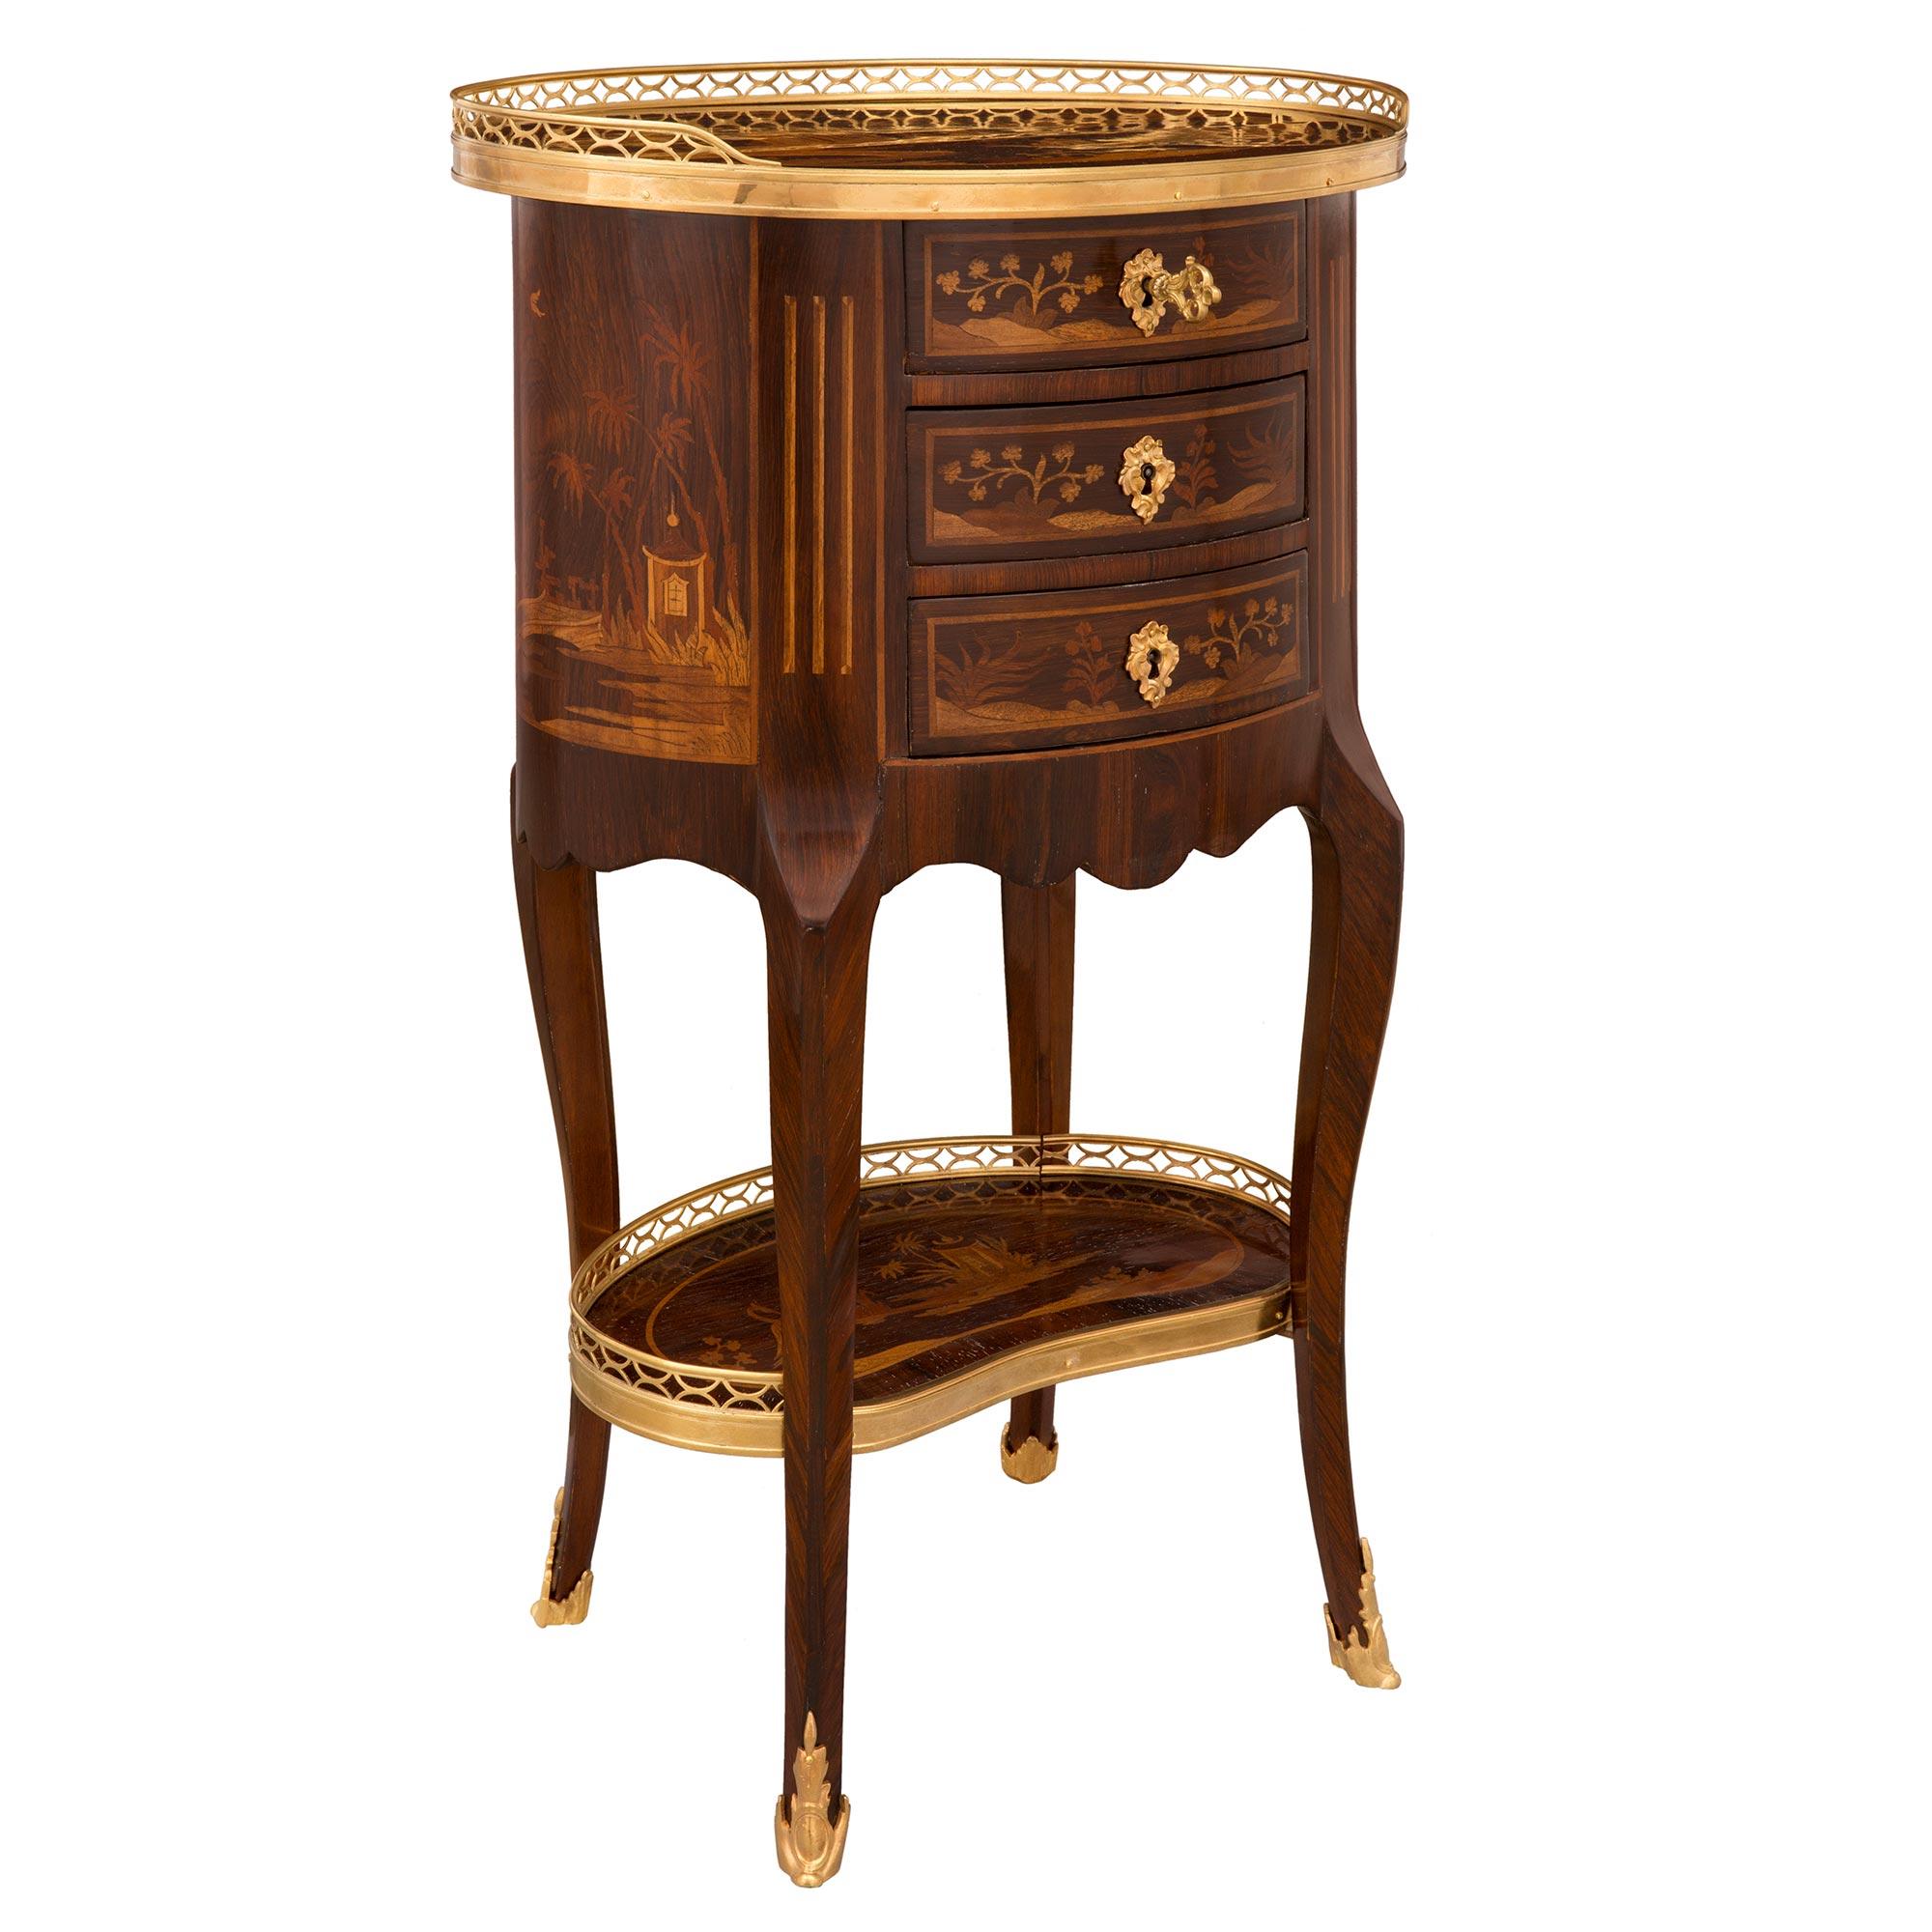 French 19th Century Transitional St. Kingwood, Fruitwood and Ormolu Side Table In Good Condition For Sale In West Palm Beach, FL